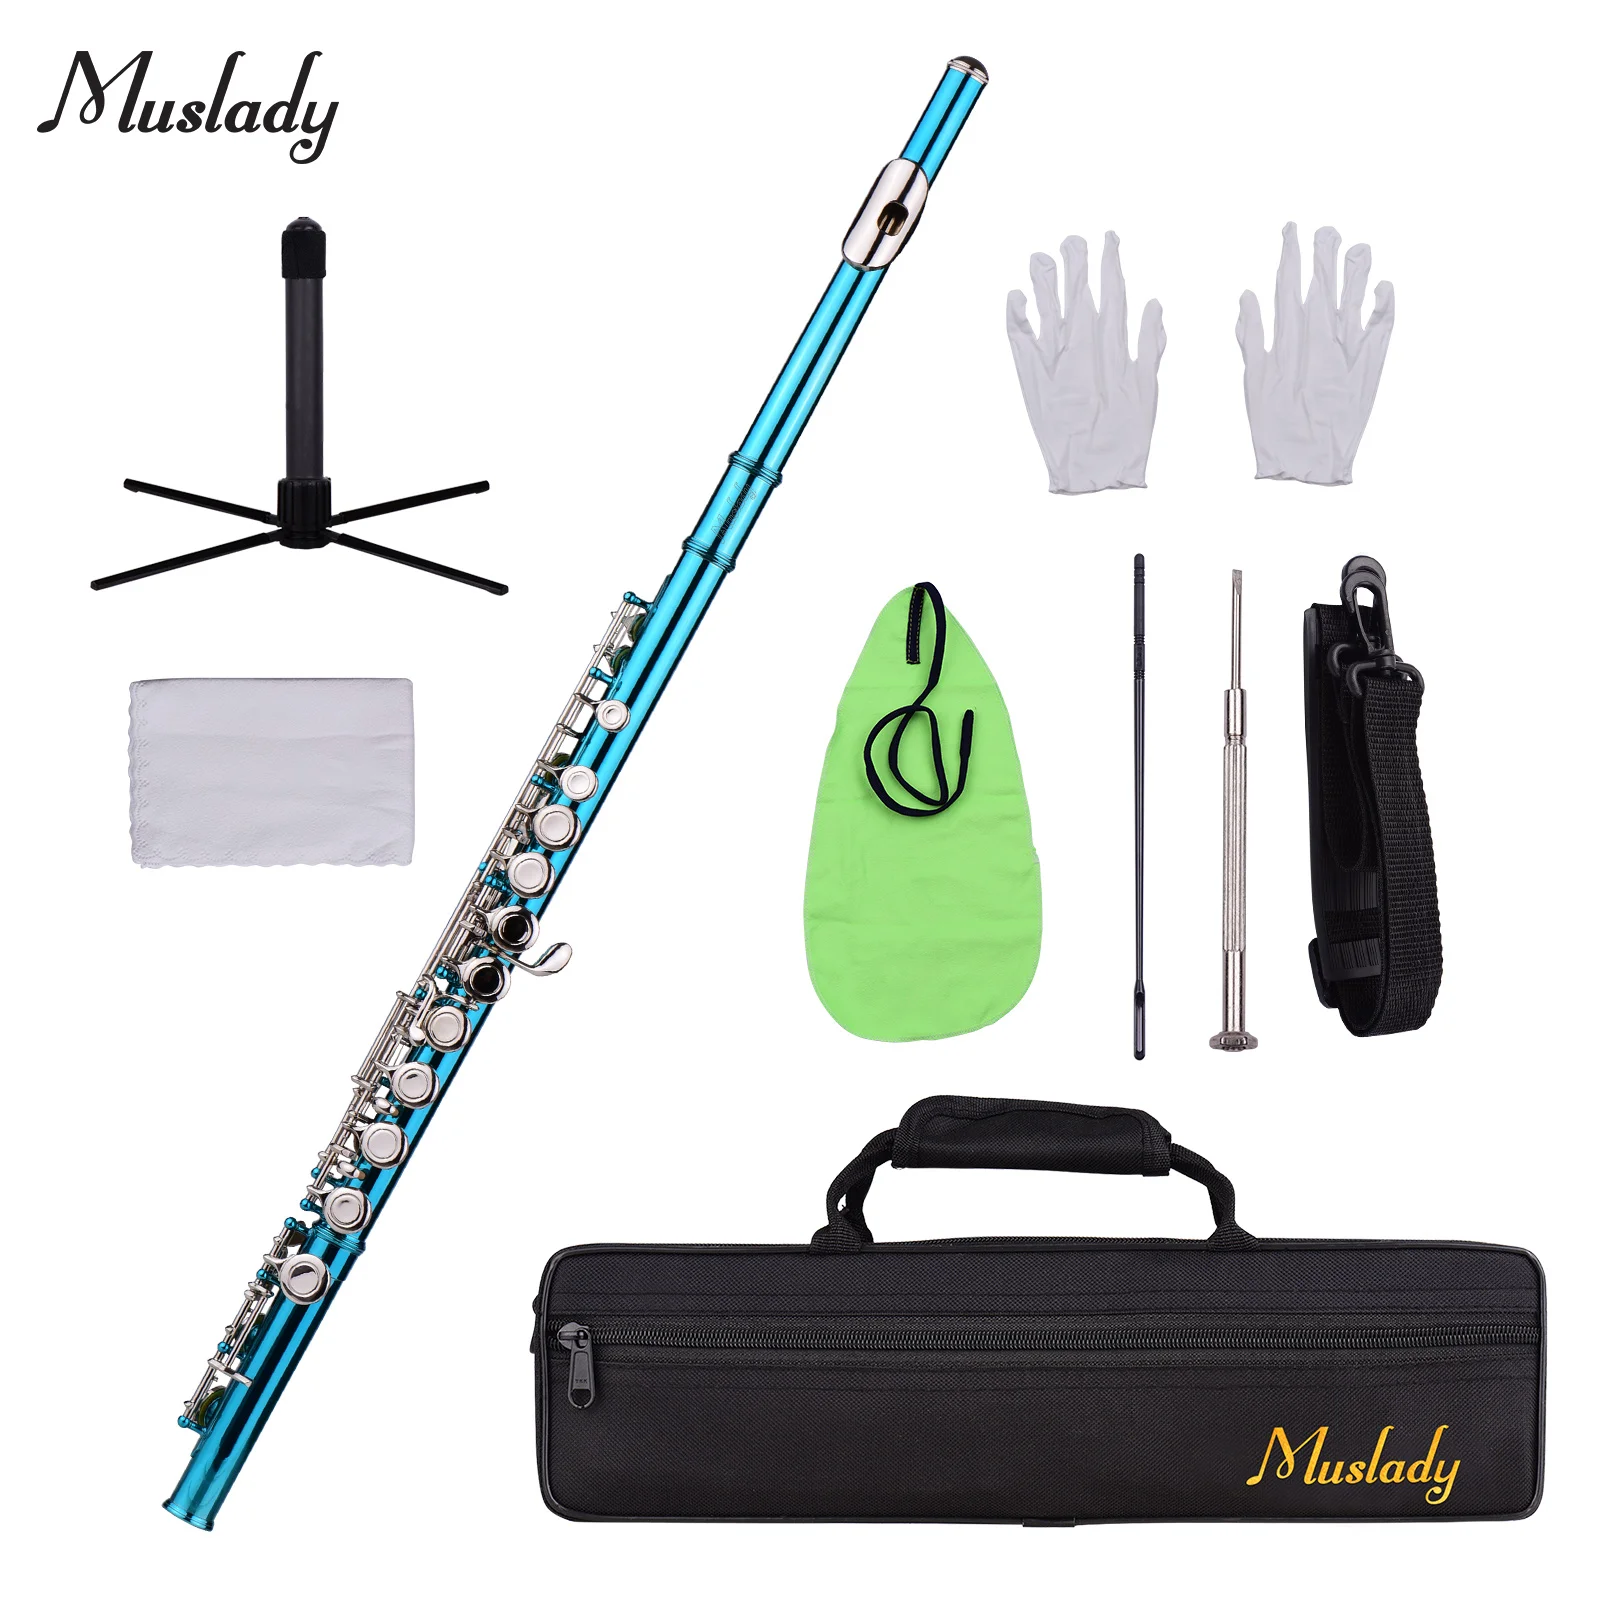 Muslady Closed Hole C Flute 16 Keys with Carry Case Flute Stand Cleaning Cloth Mini Screwdriver Cleaning Rod Wind Instrument